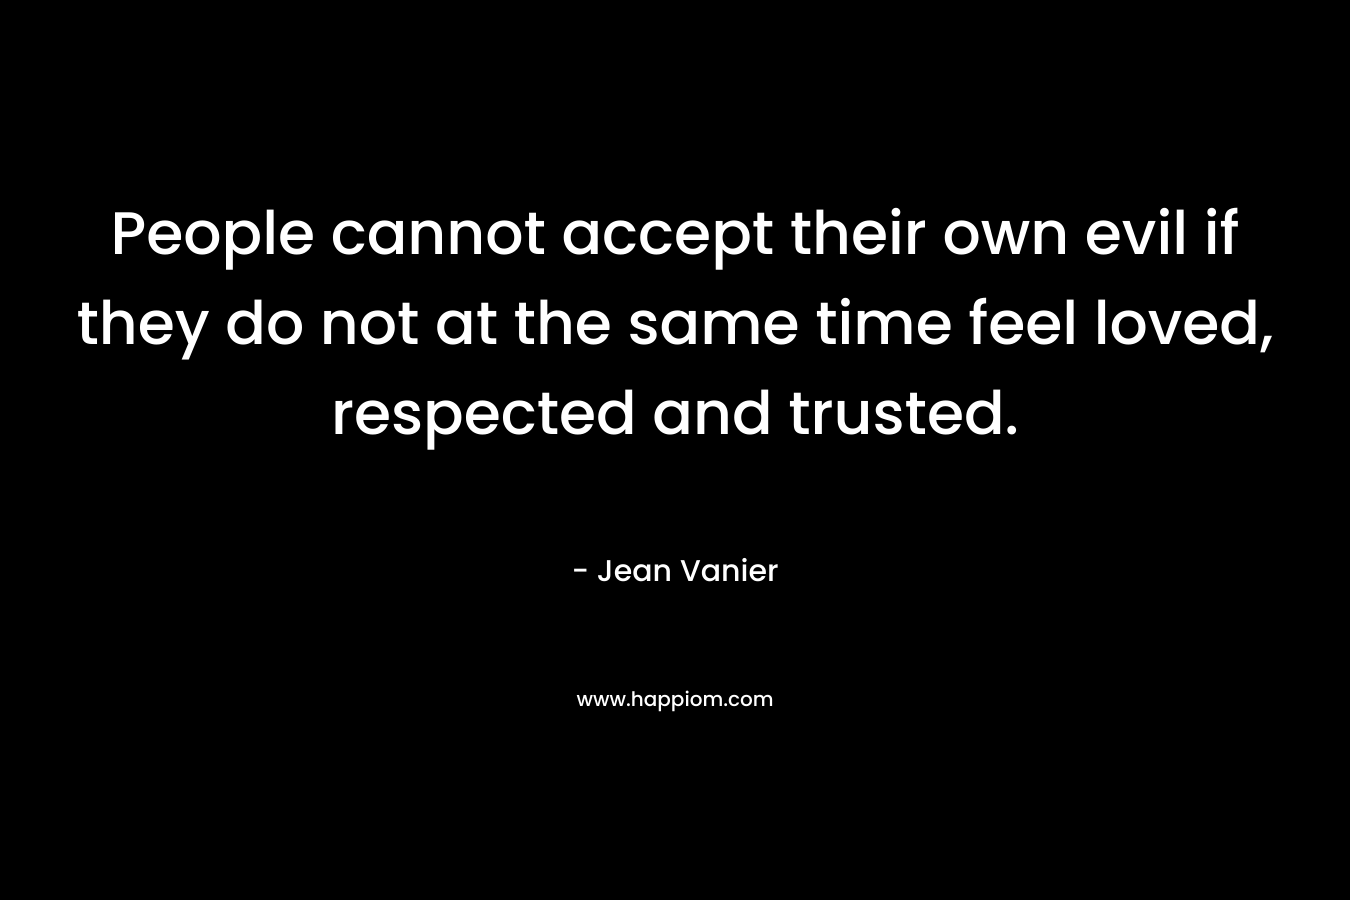 People cannot accept their own evil if they do not at the same time feel loved, respected and trusted.